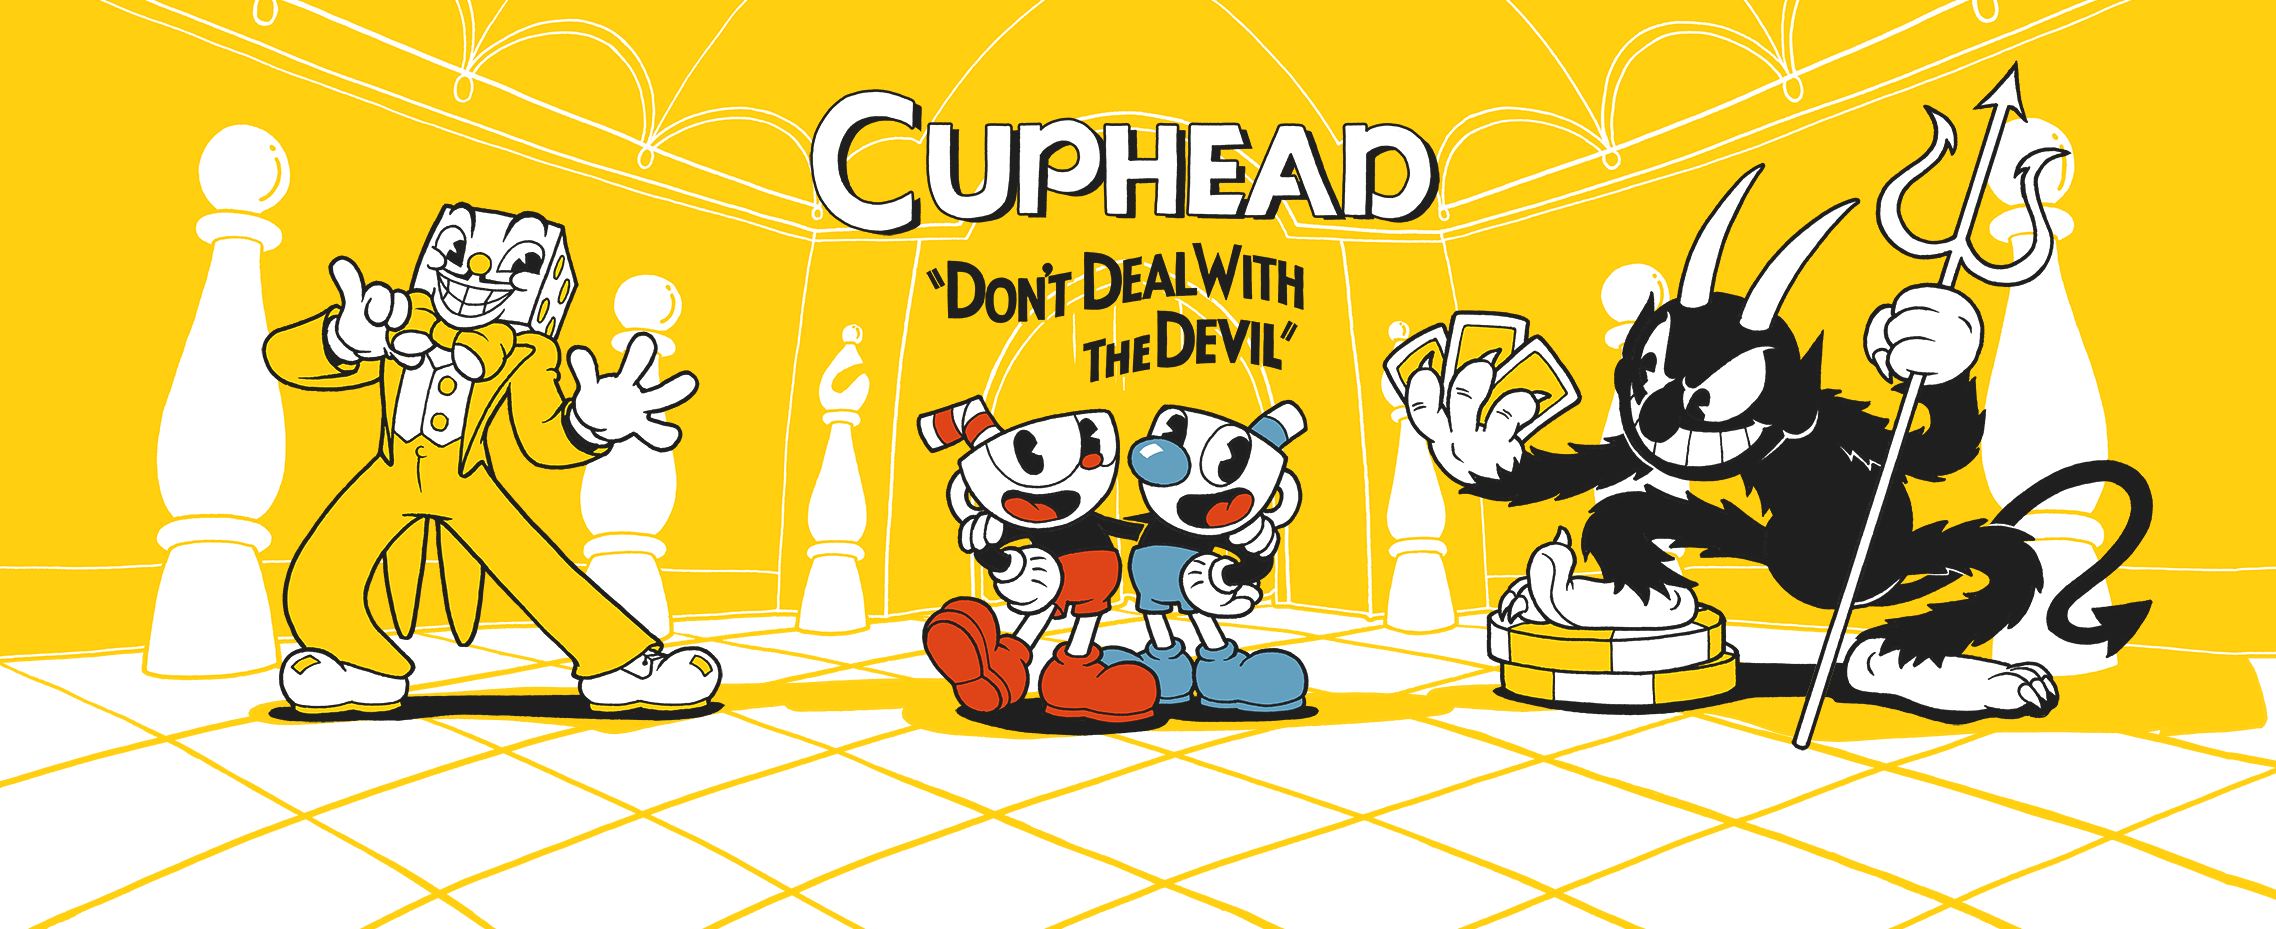 Cuphead (PS4) Review